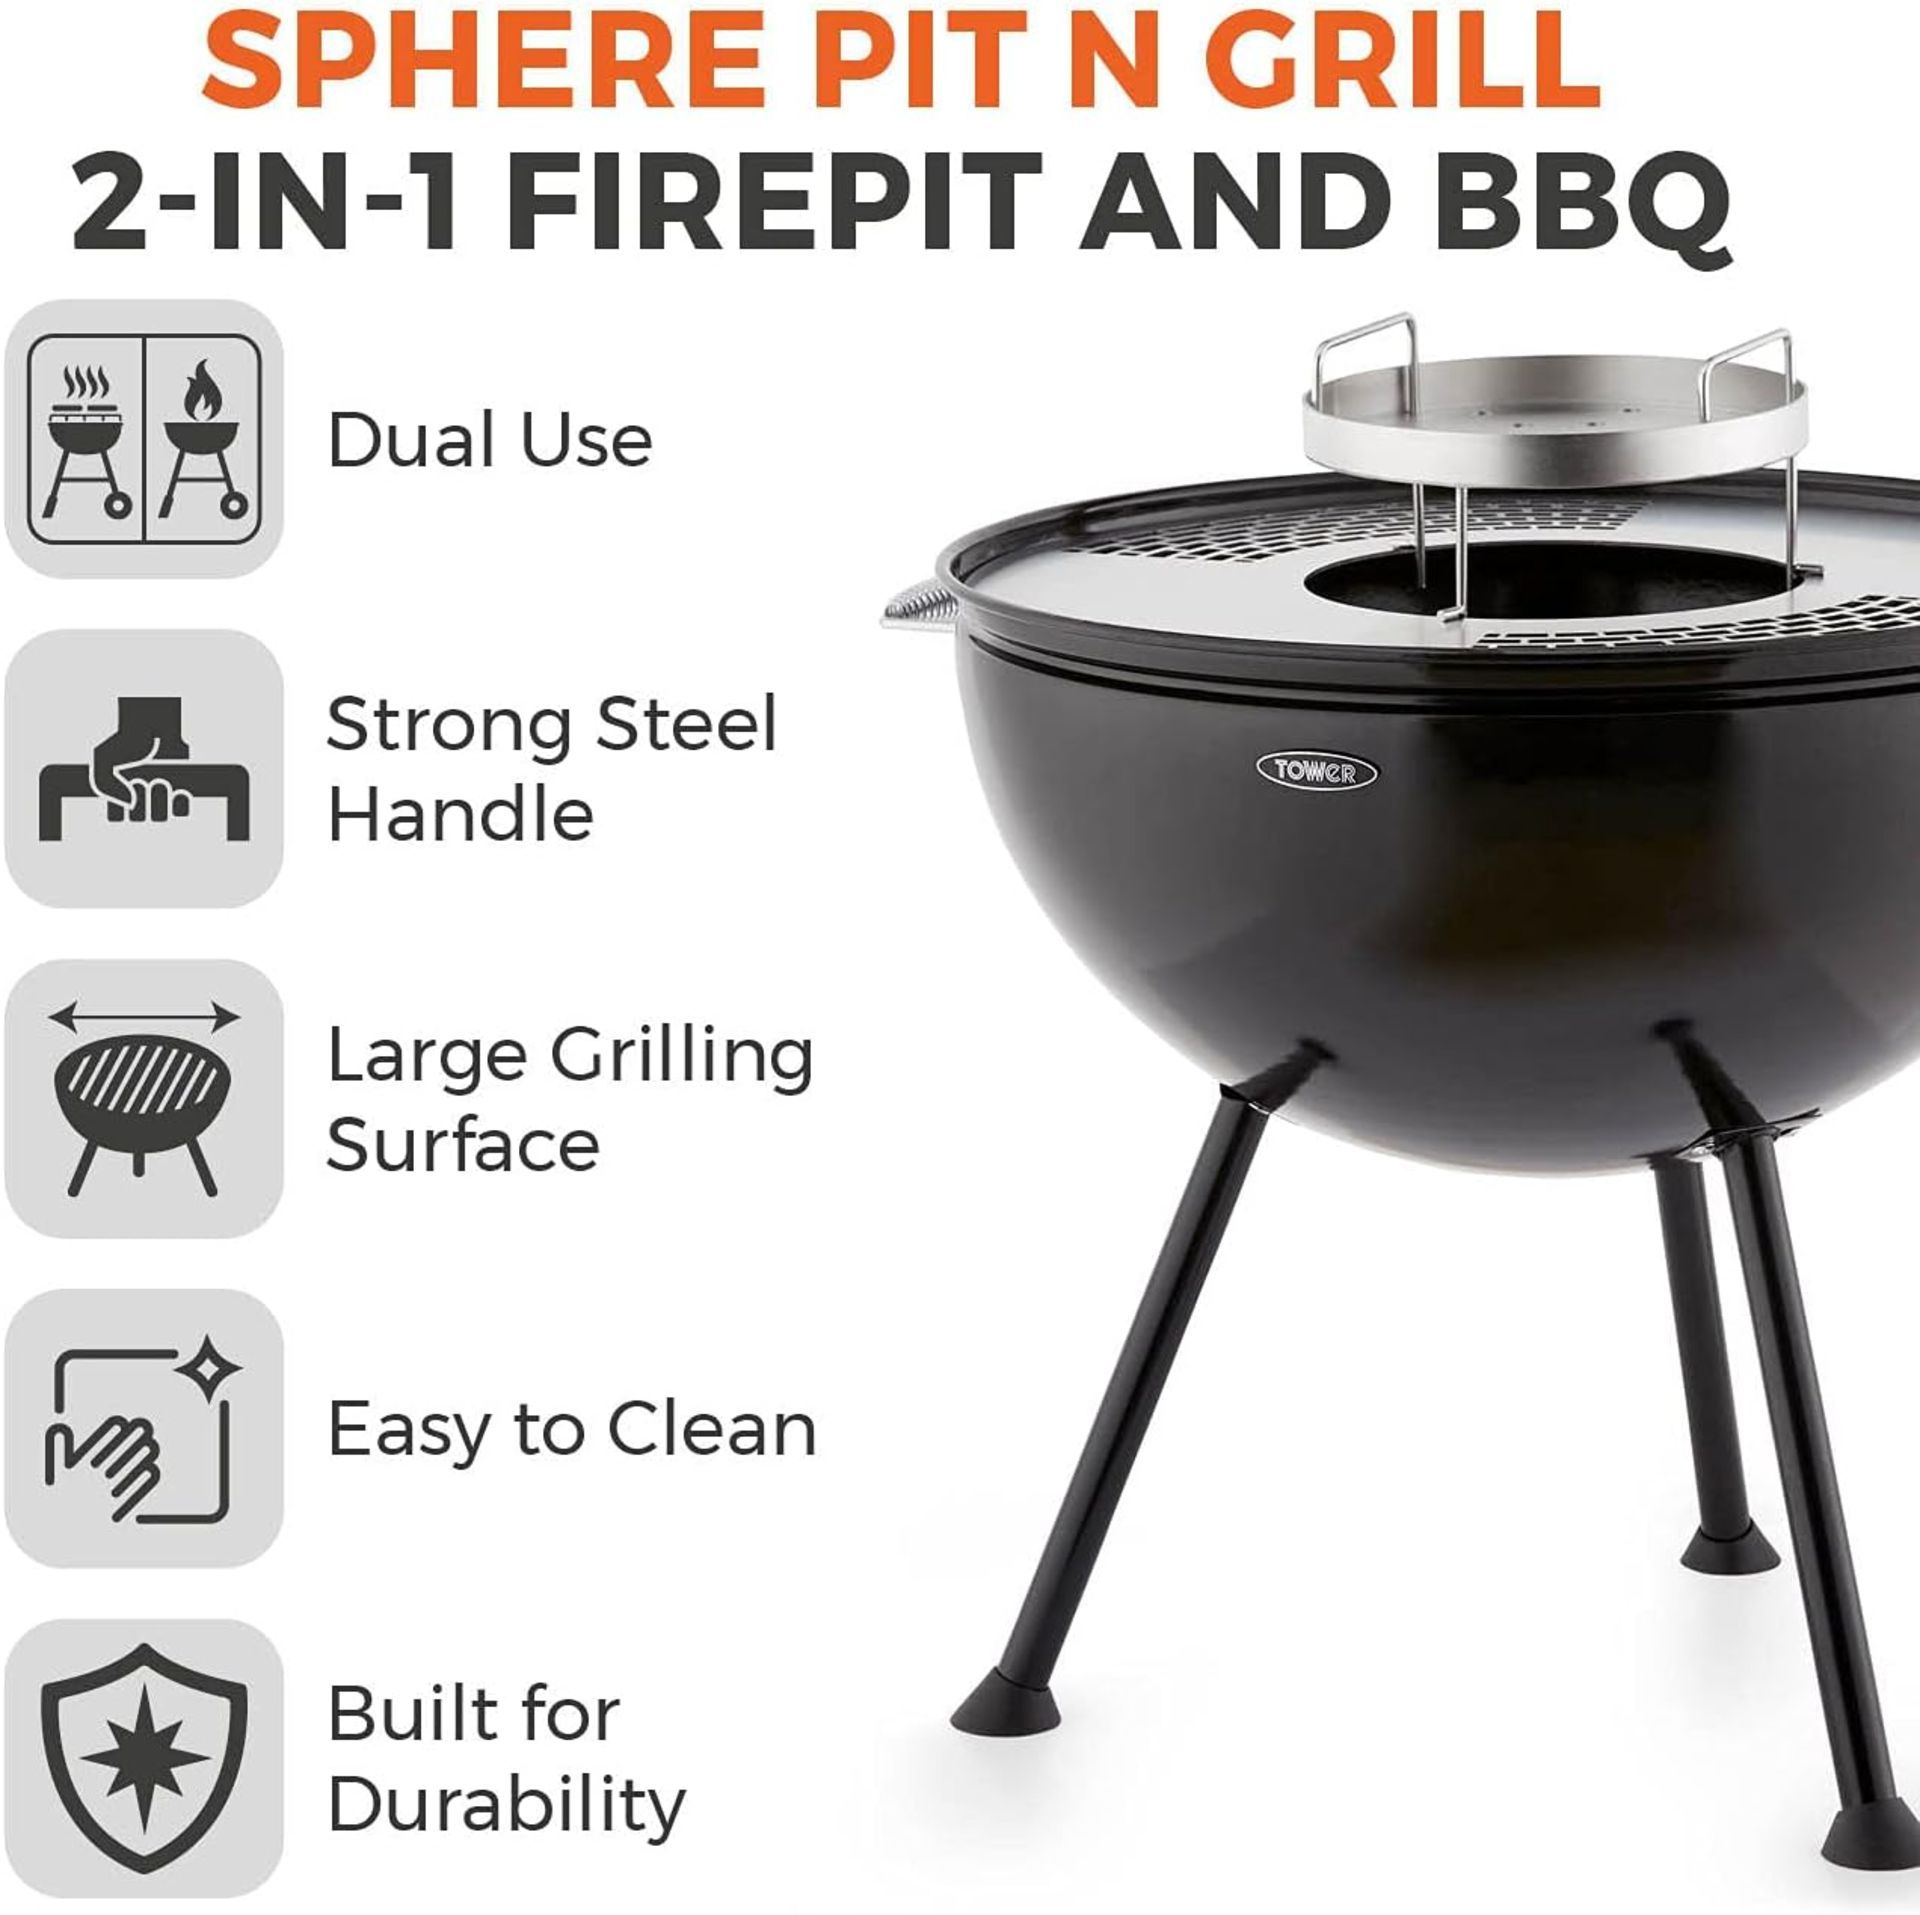 2x BRAND NEW Tower 2-in-1 Fire Pit and BBQ. RRP £159.99 EACH. Combining visual appeal and - Image 2 of 4